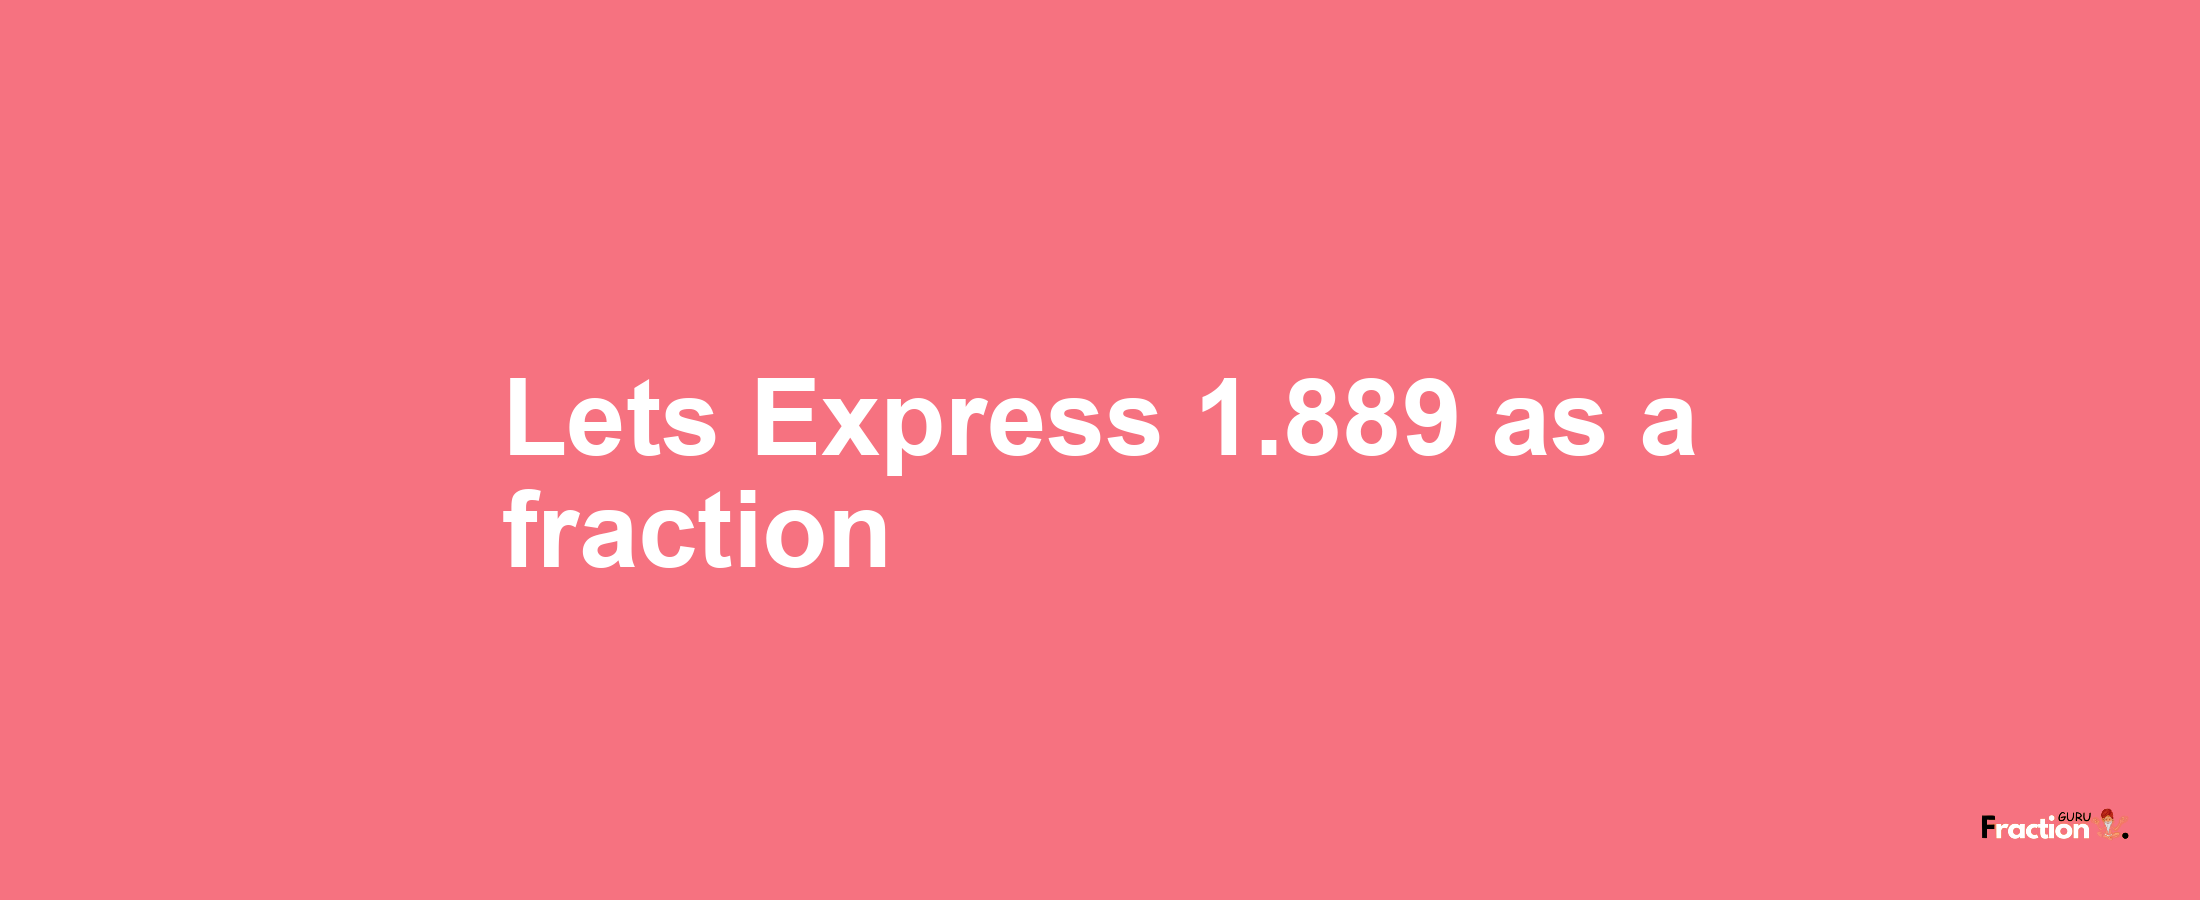 Lets Express 1.889 as afraction